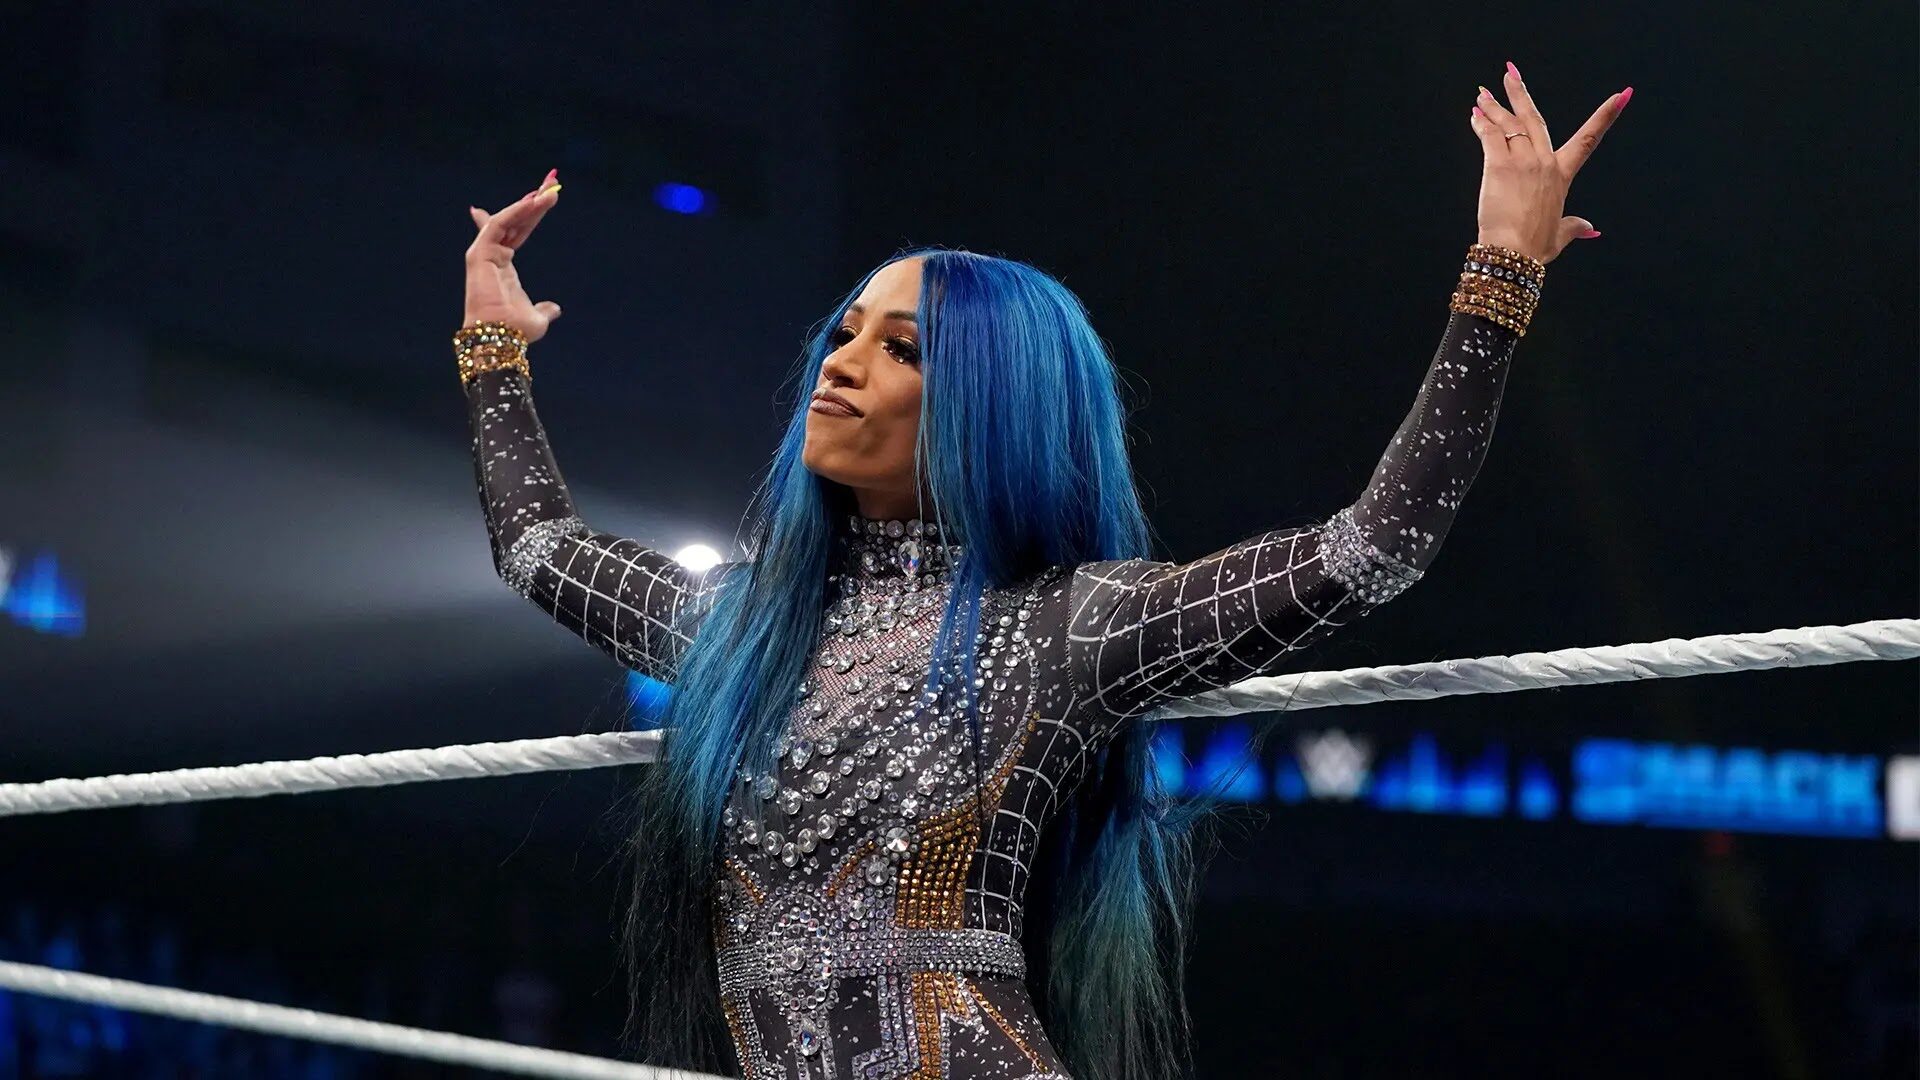 Sasha Banks Asking Price For Signing With A Wrestling Promotion Revealed